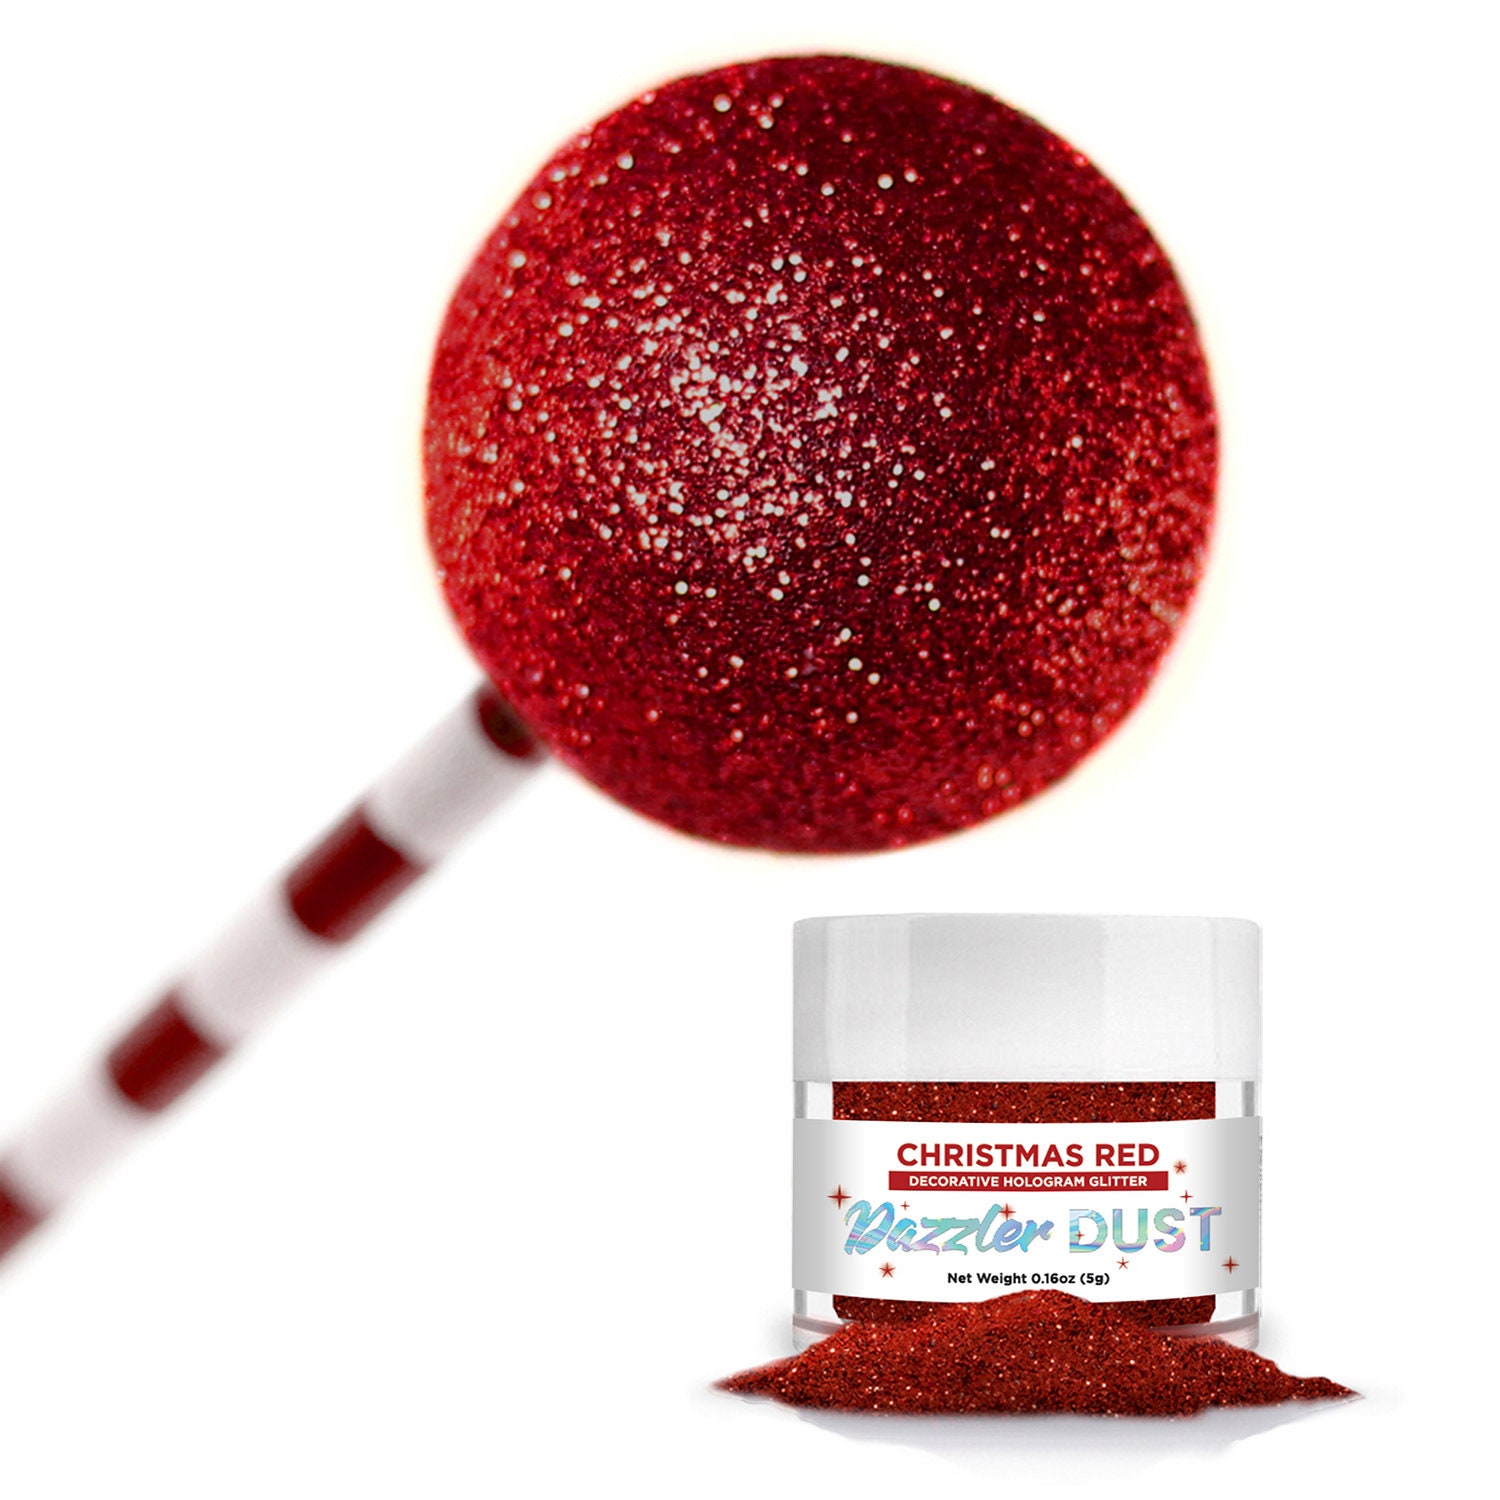 Edible Glitter in Christmas Red / Sprinklify